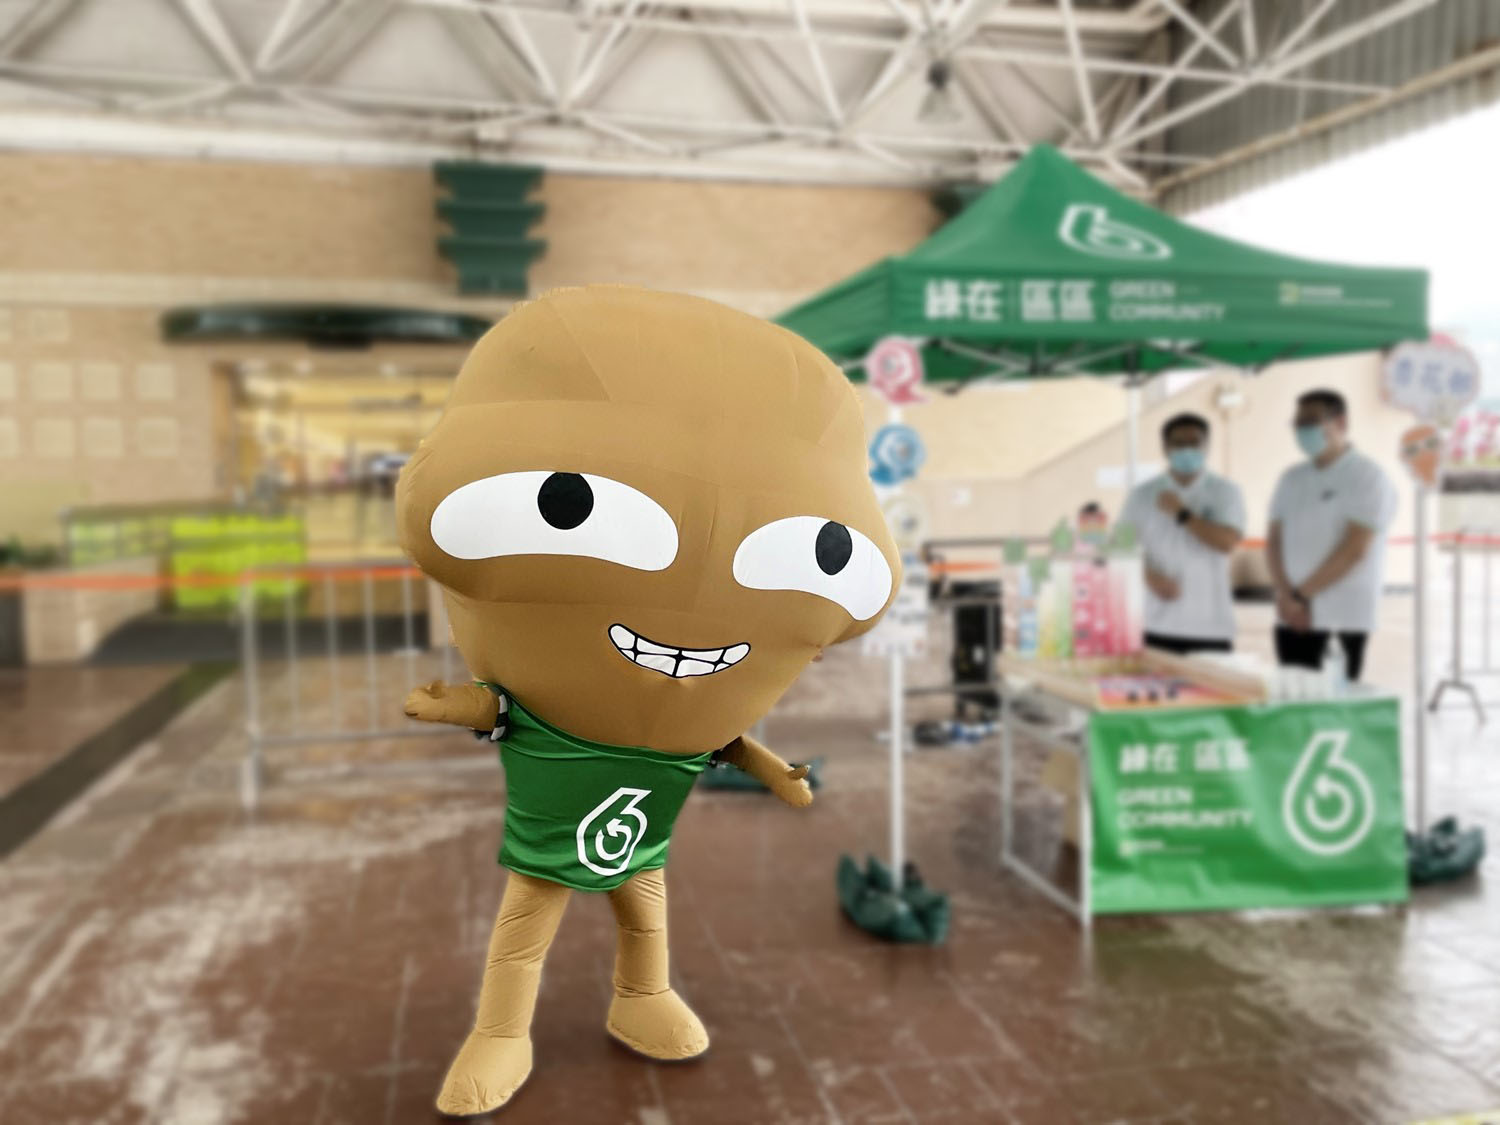 Mascot Big Waster promoting GREEN@COMMUNITY in front of a game booth